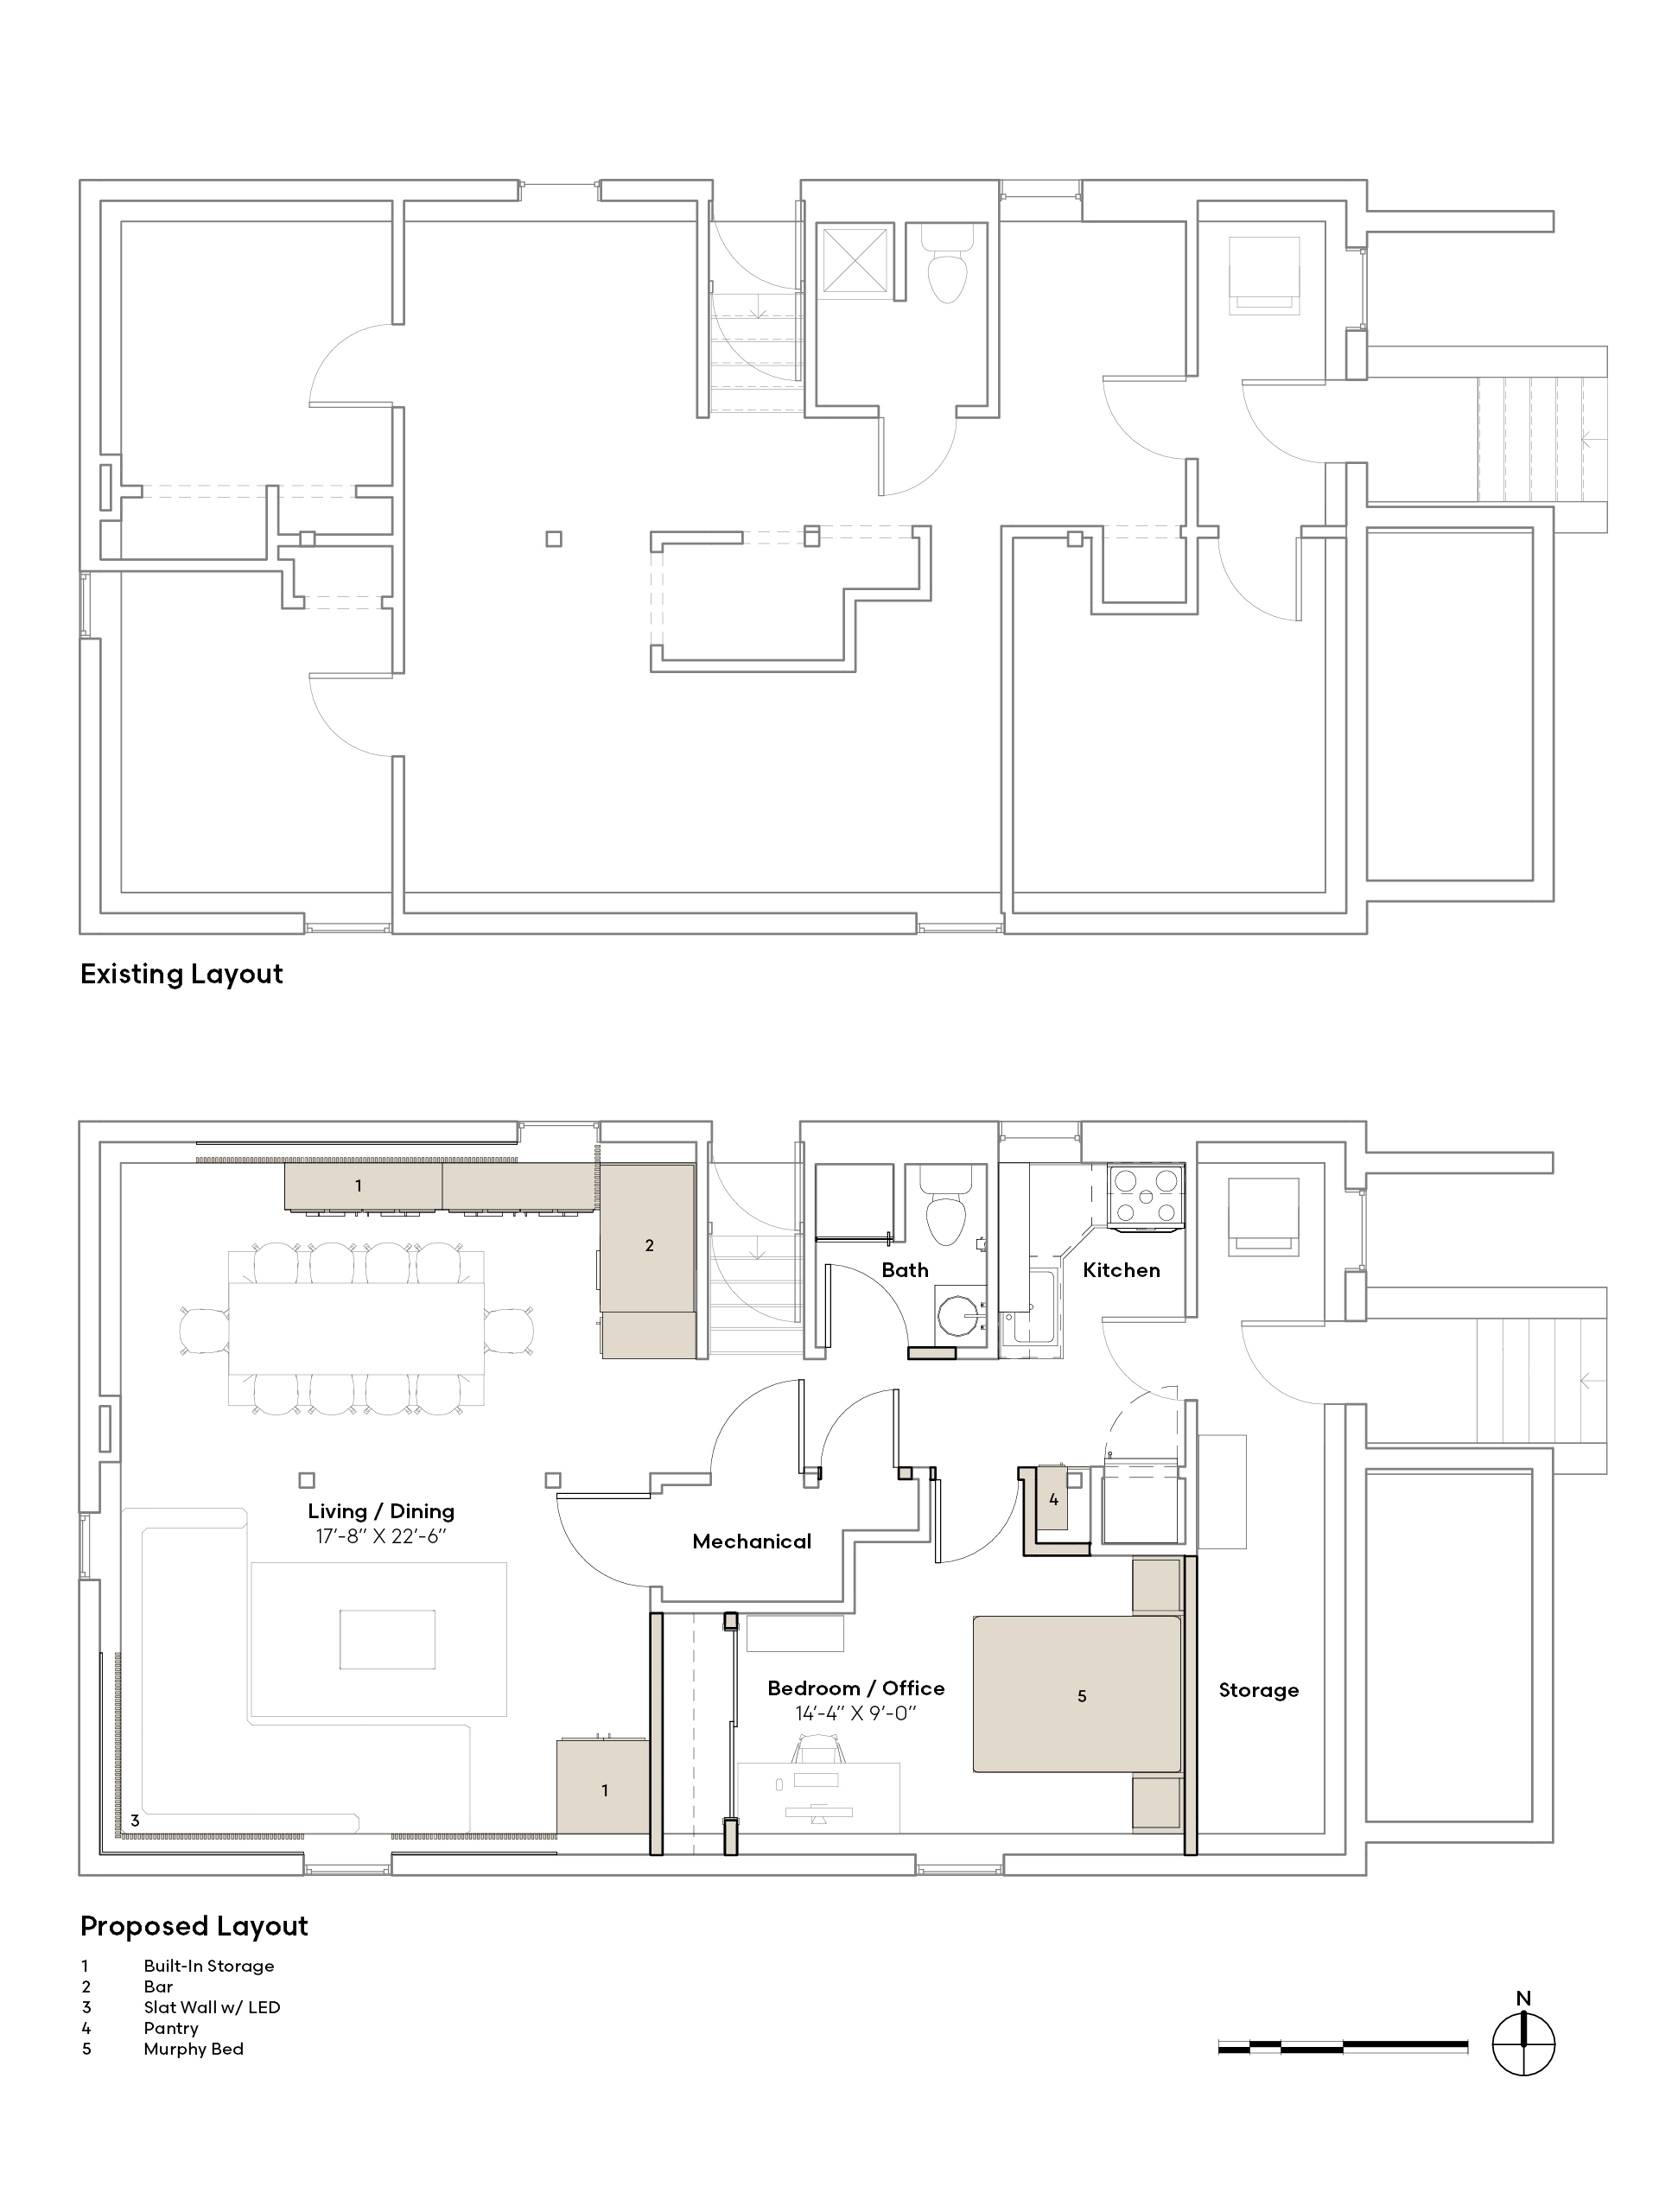 Existing and proposed plans of basement renovation
